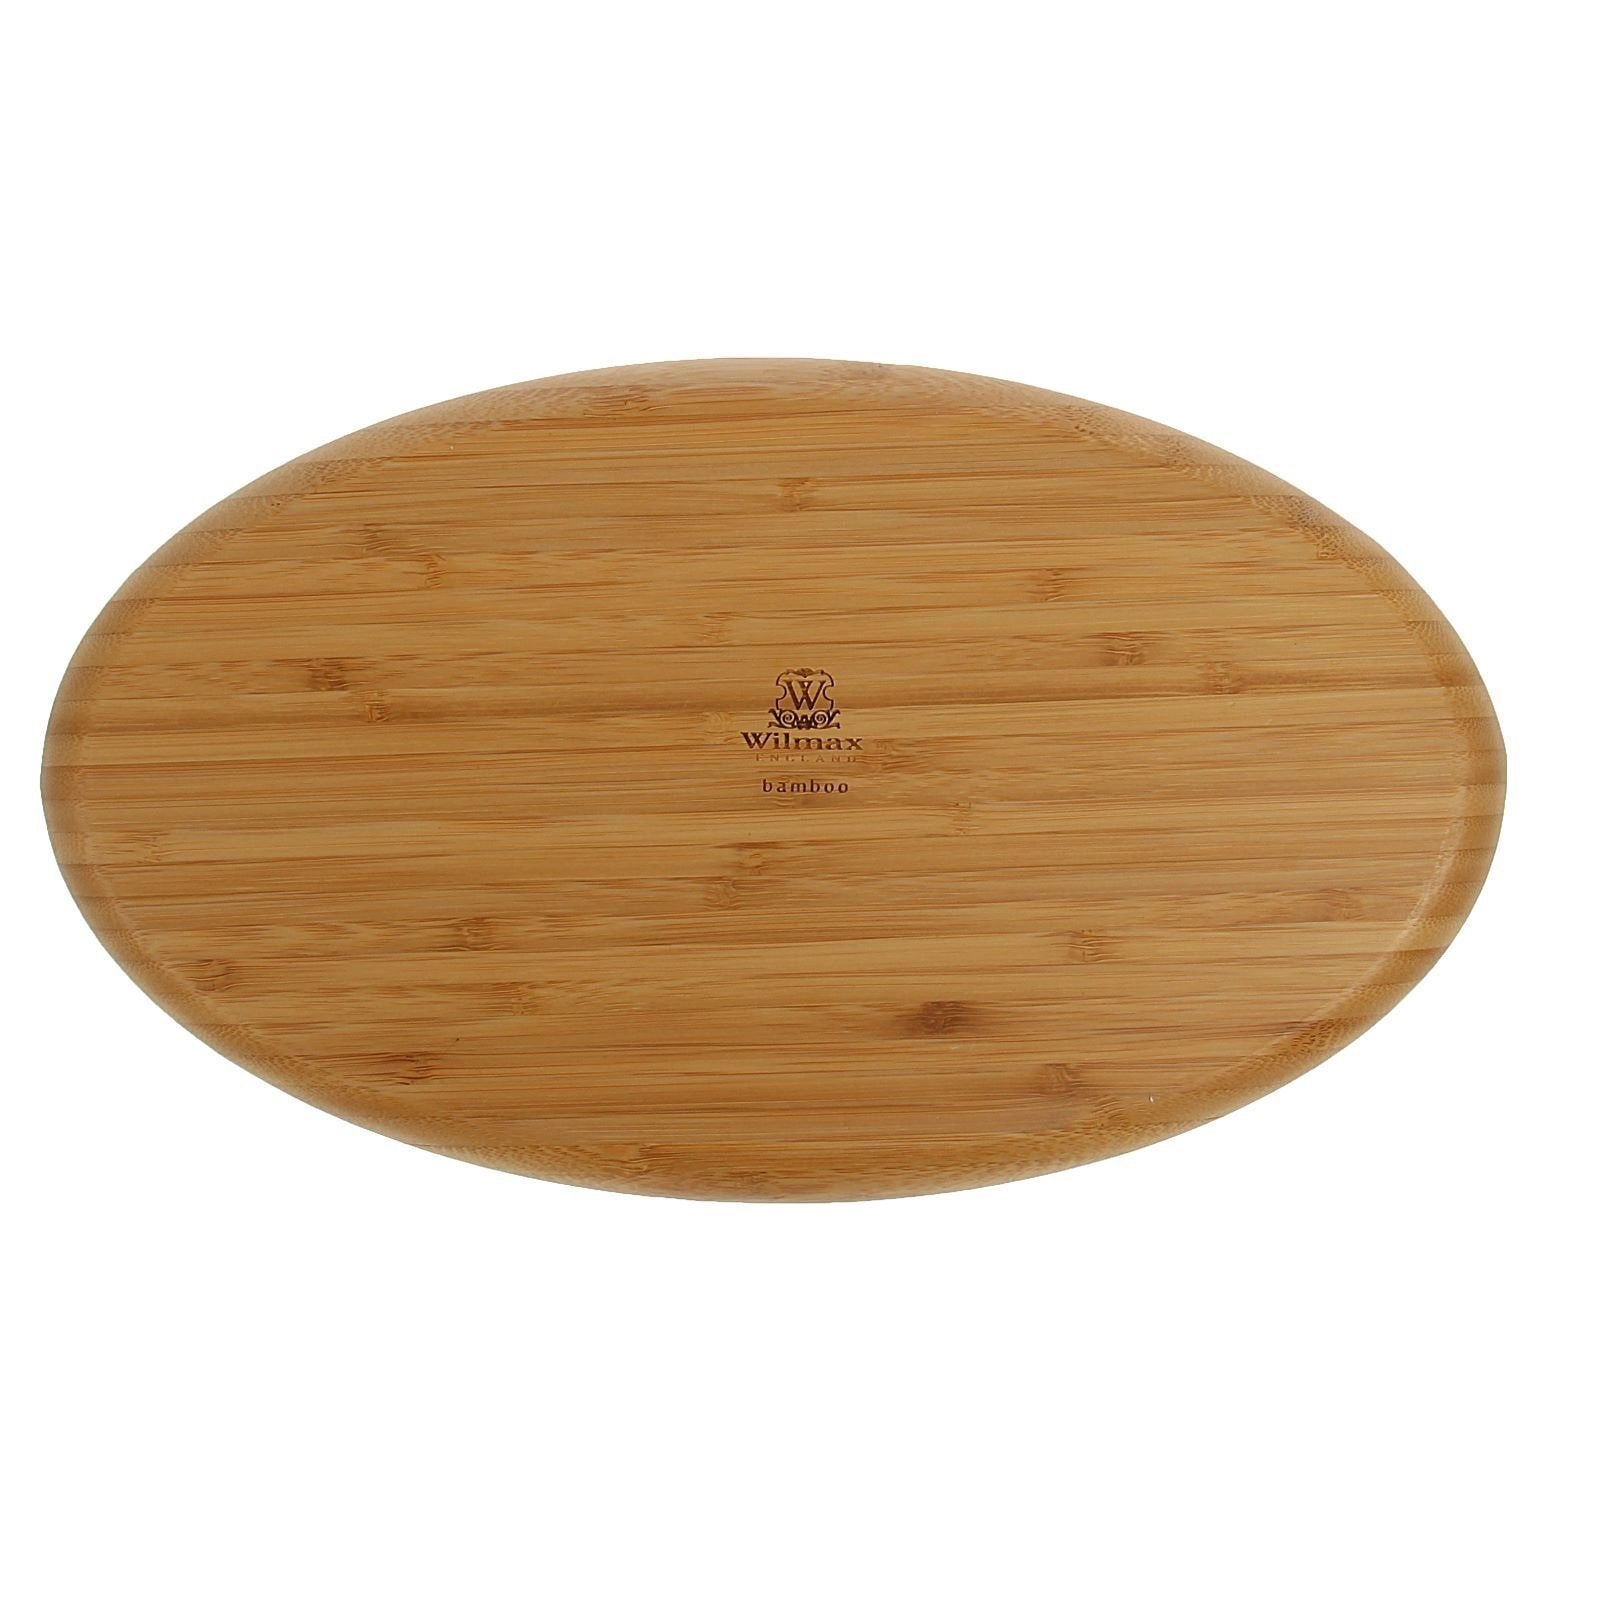 Set of 6 Natural Bamboo 3 Section Platters 14" x 8"